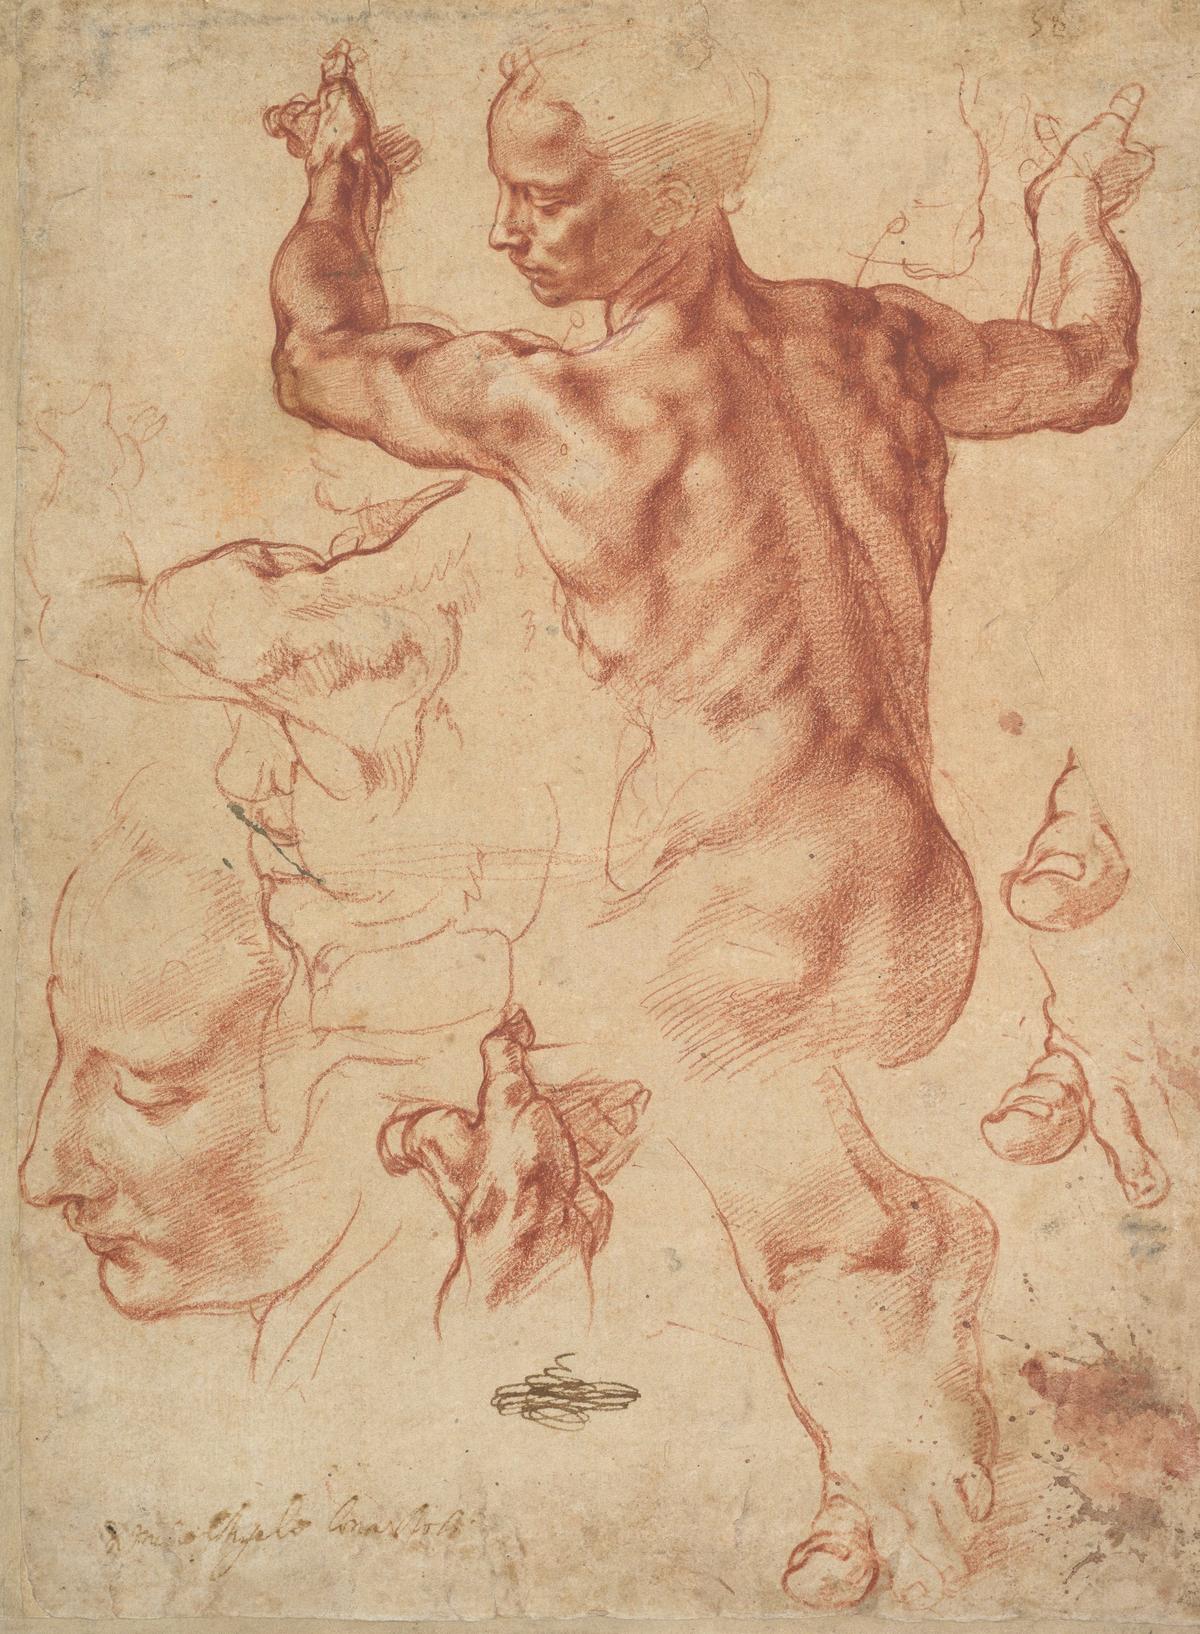  Studies for the Libyan Sibyl, between 1510-1511 by Michelangelo. Red chalk, white chalk and charcoal on paper; 11 3/8 inches by 8 7/16 inches. Metropolitan Museum of Art, New York City. (Public Domain)